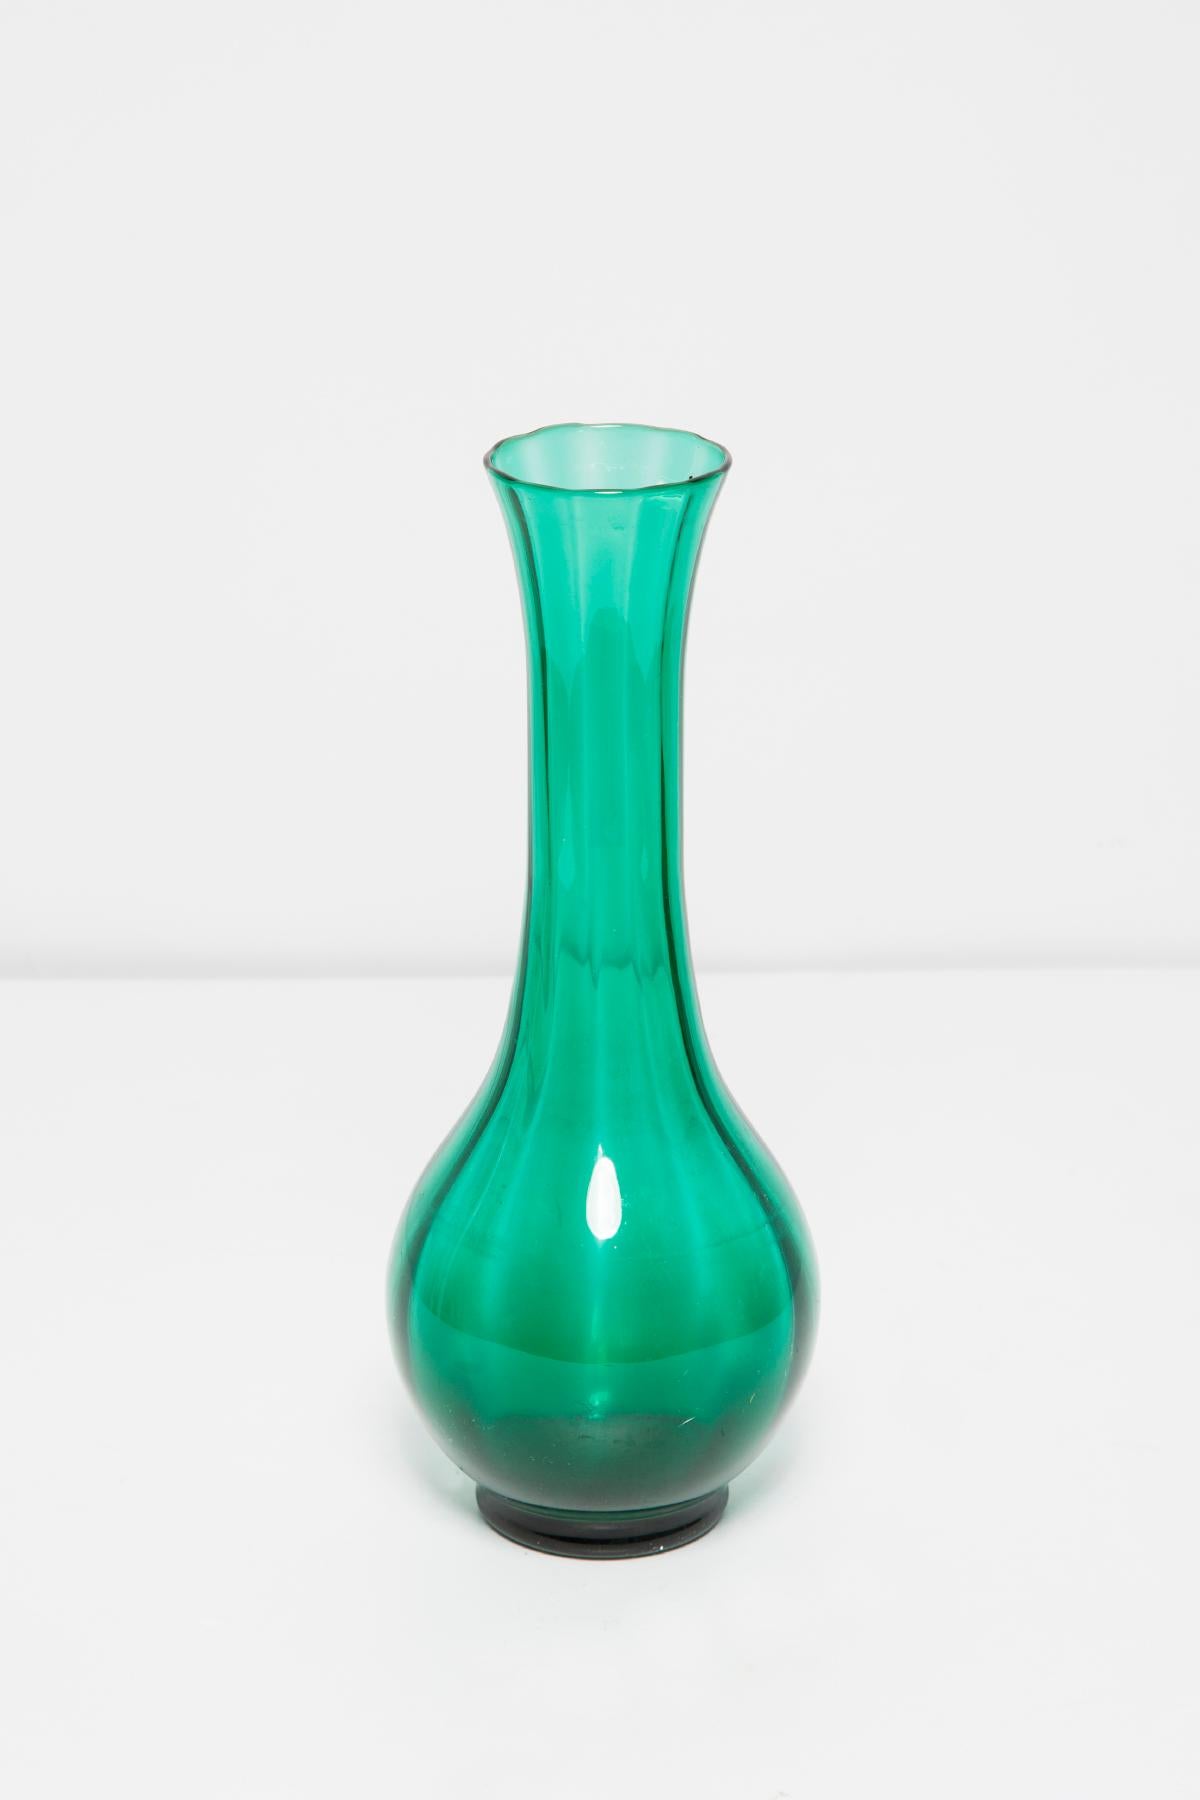 20th Century Mid Century Vintage Artistic Glass Green Vase, Europe, 1970s For Sale